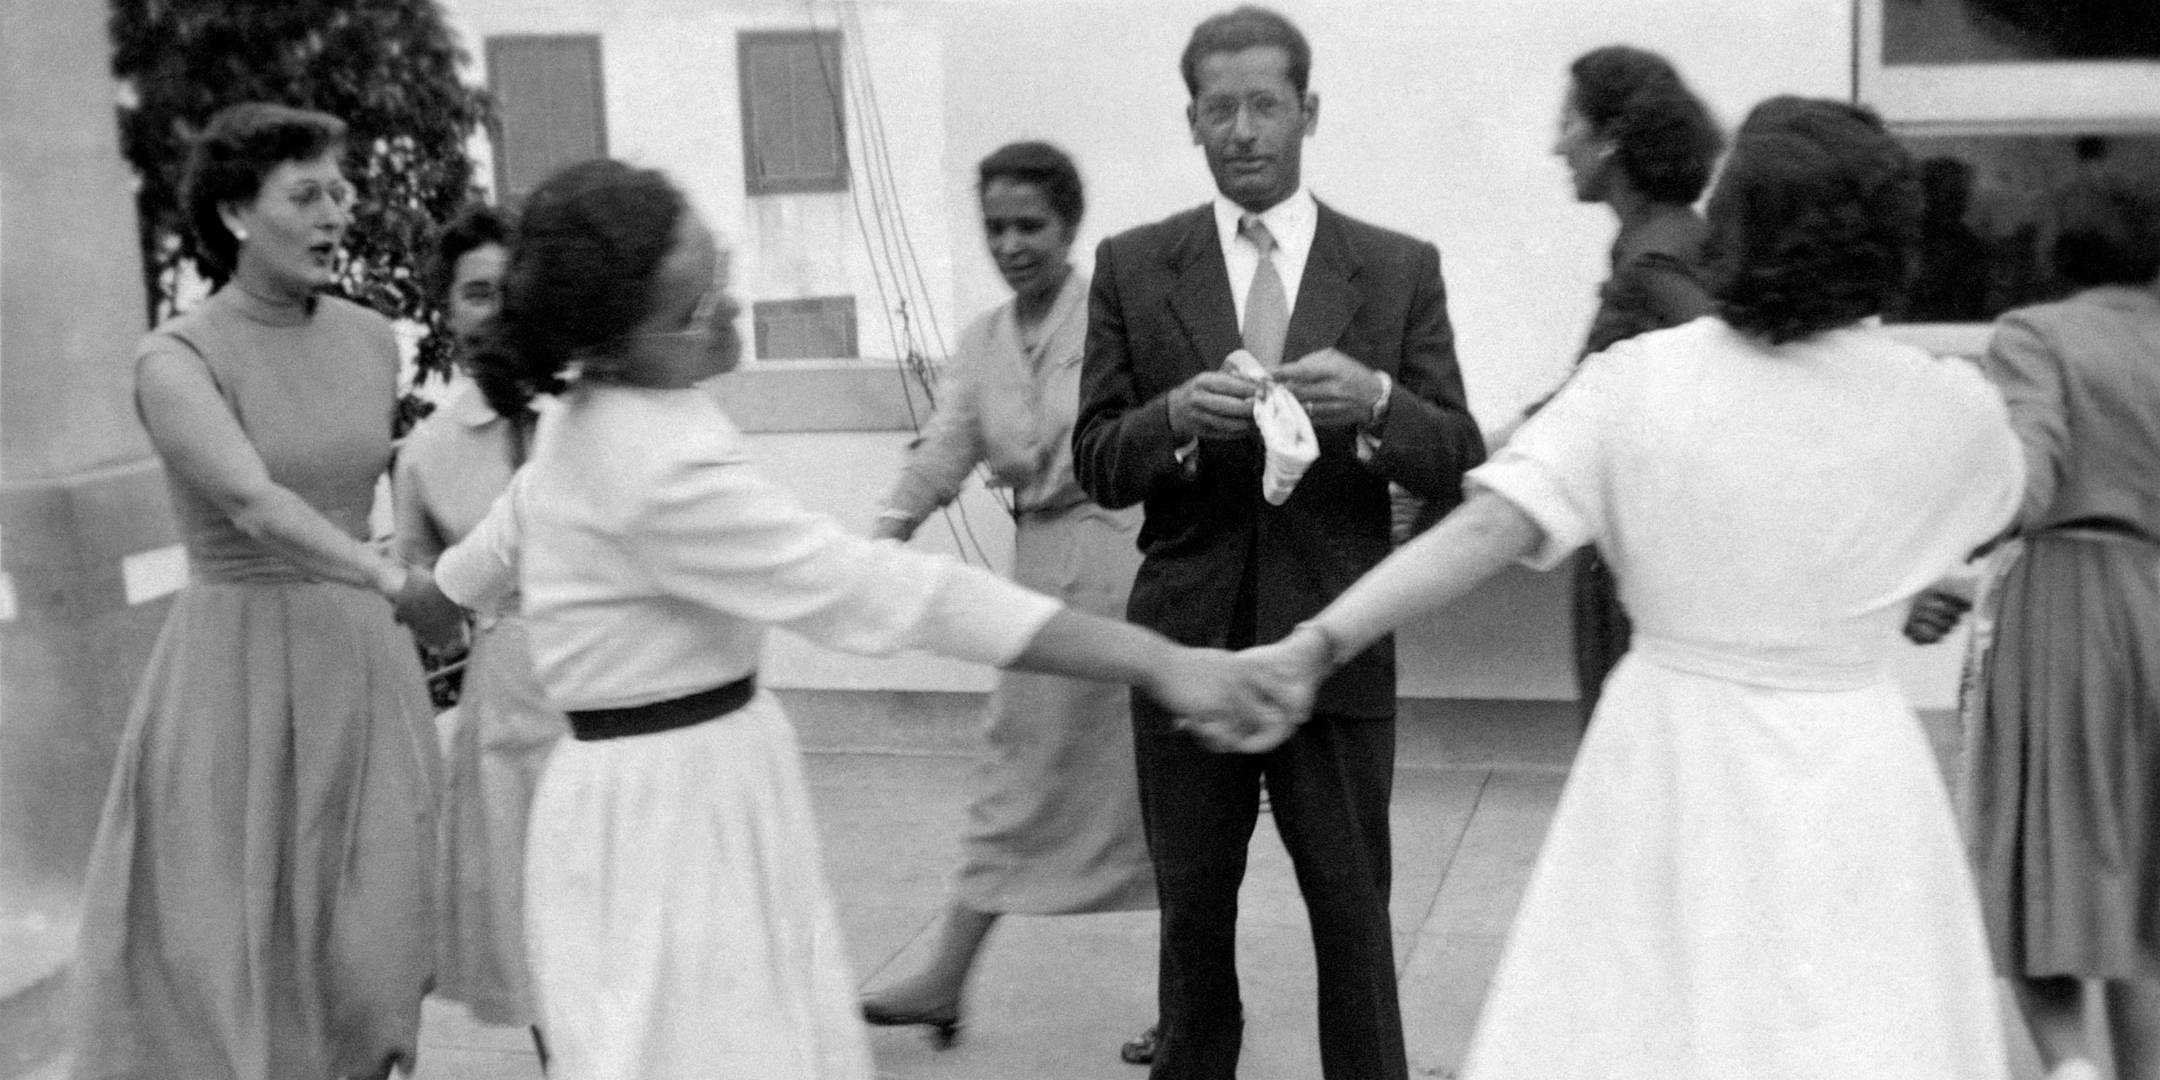 José Coelho is farewelled by his teaching colleagues in Ponta do Sol, Madeira, prior to his departure for Australia, 1956.